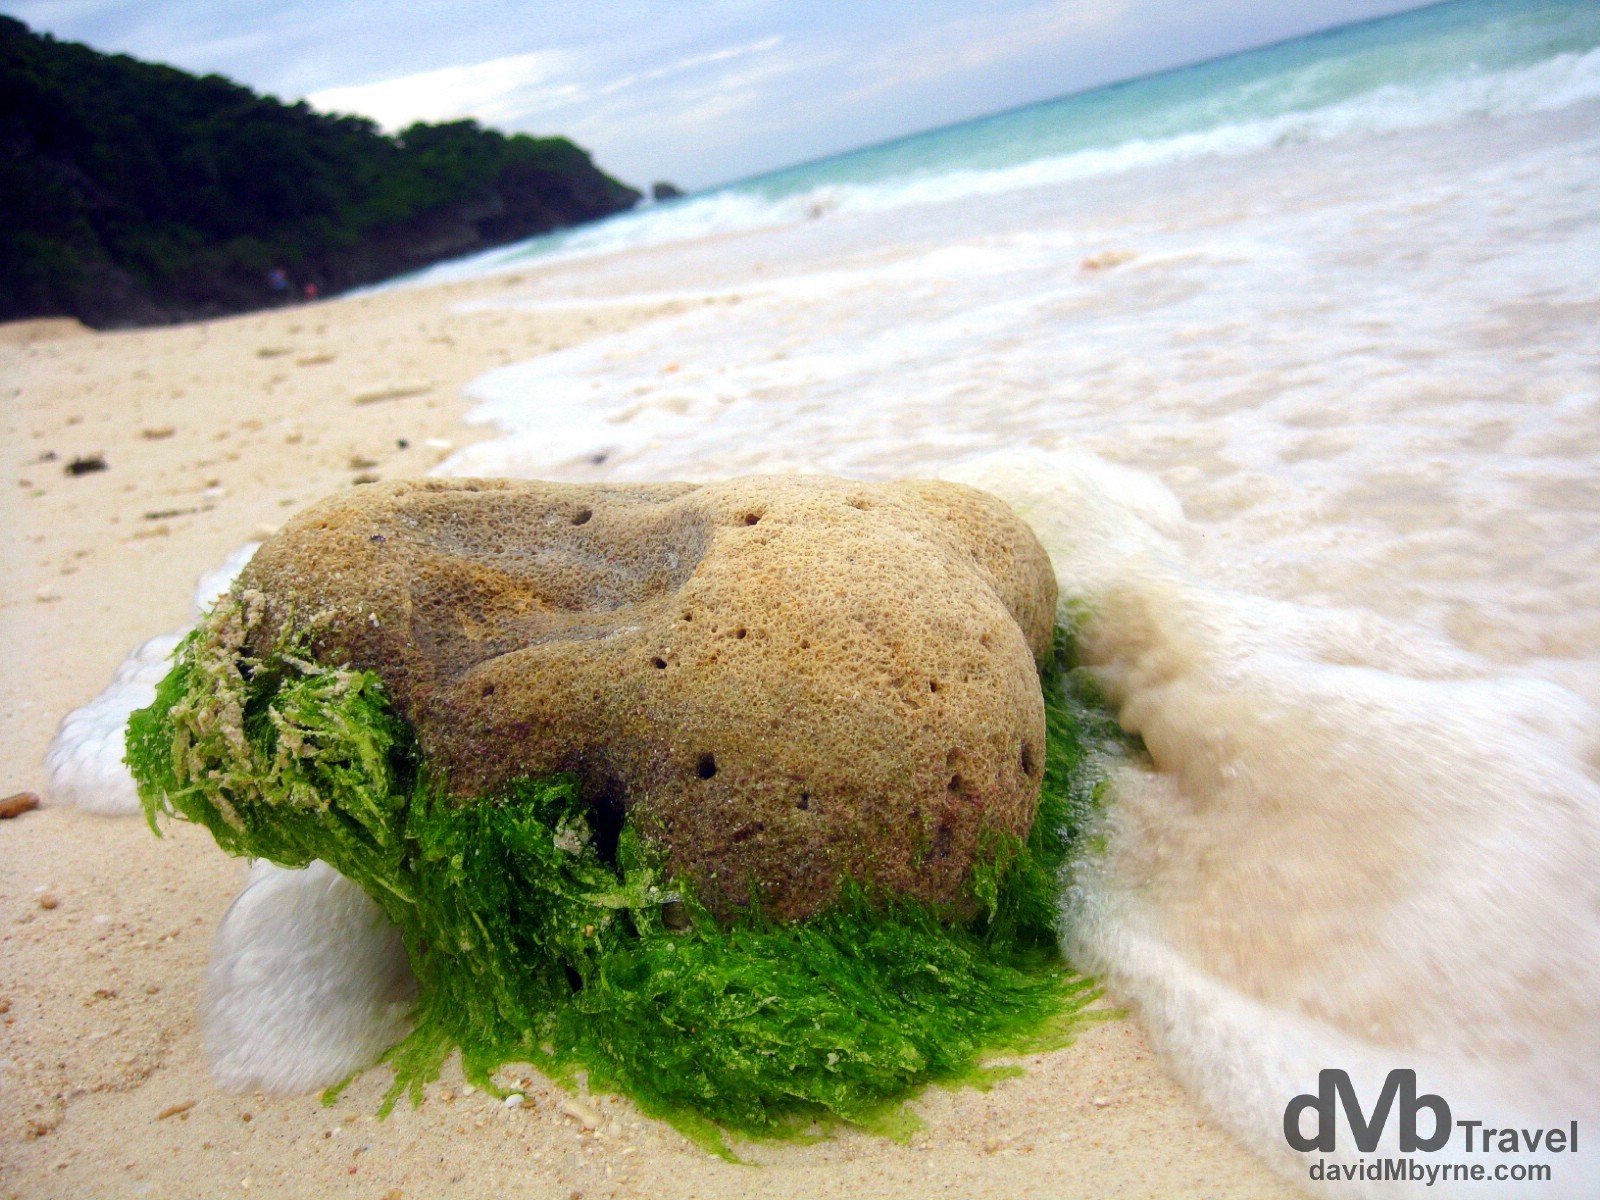 A moss covered stone on the shores of Puka beach, Boracay Island, the Philippines. September 24th 2011.